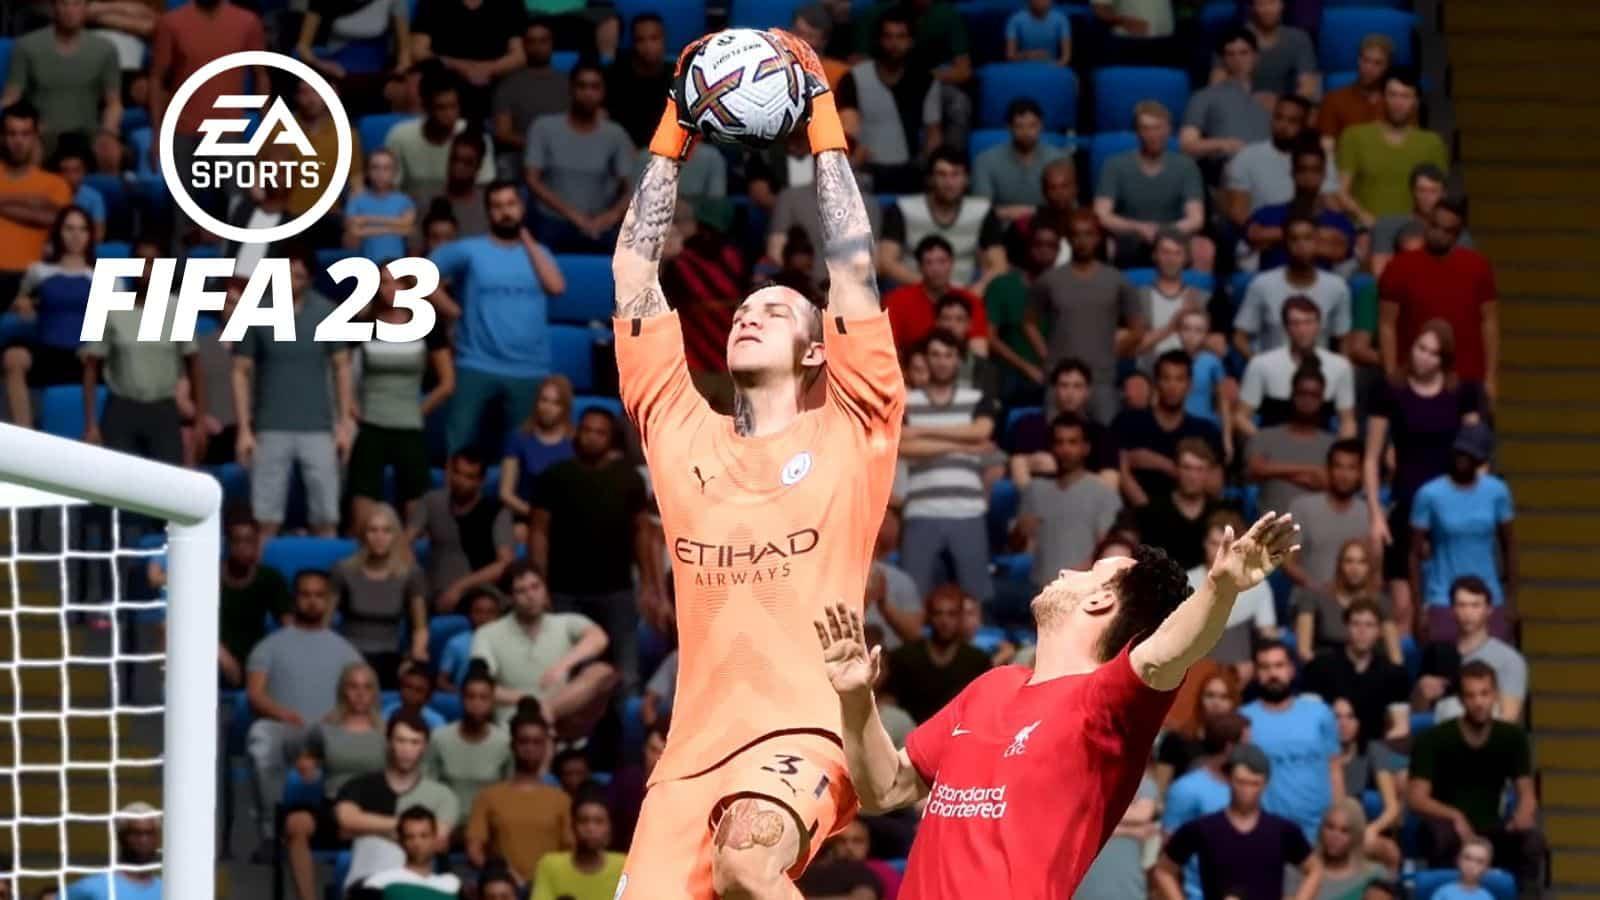 goalkeeper catching ball in FIFA 23